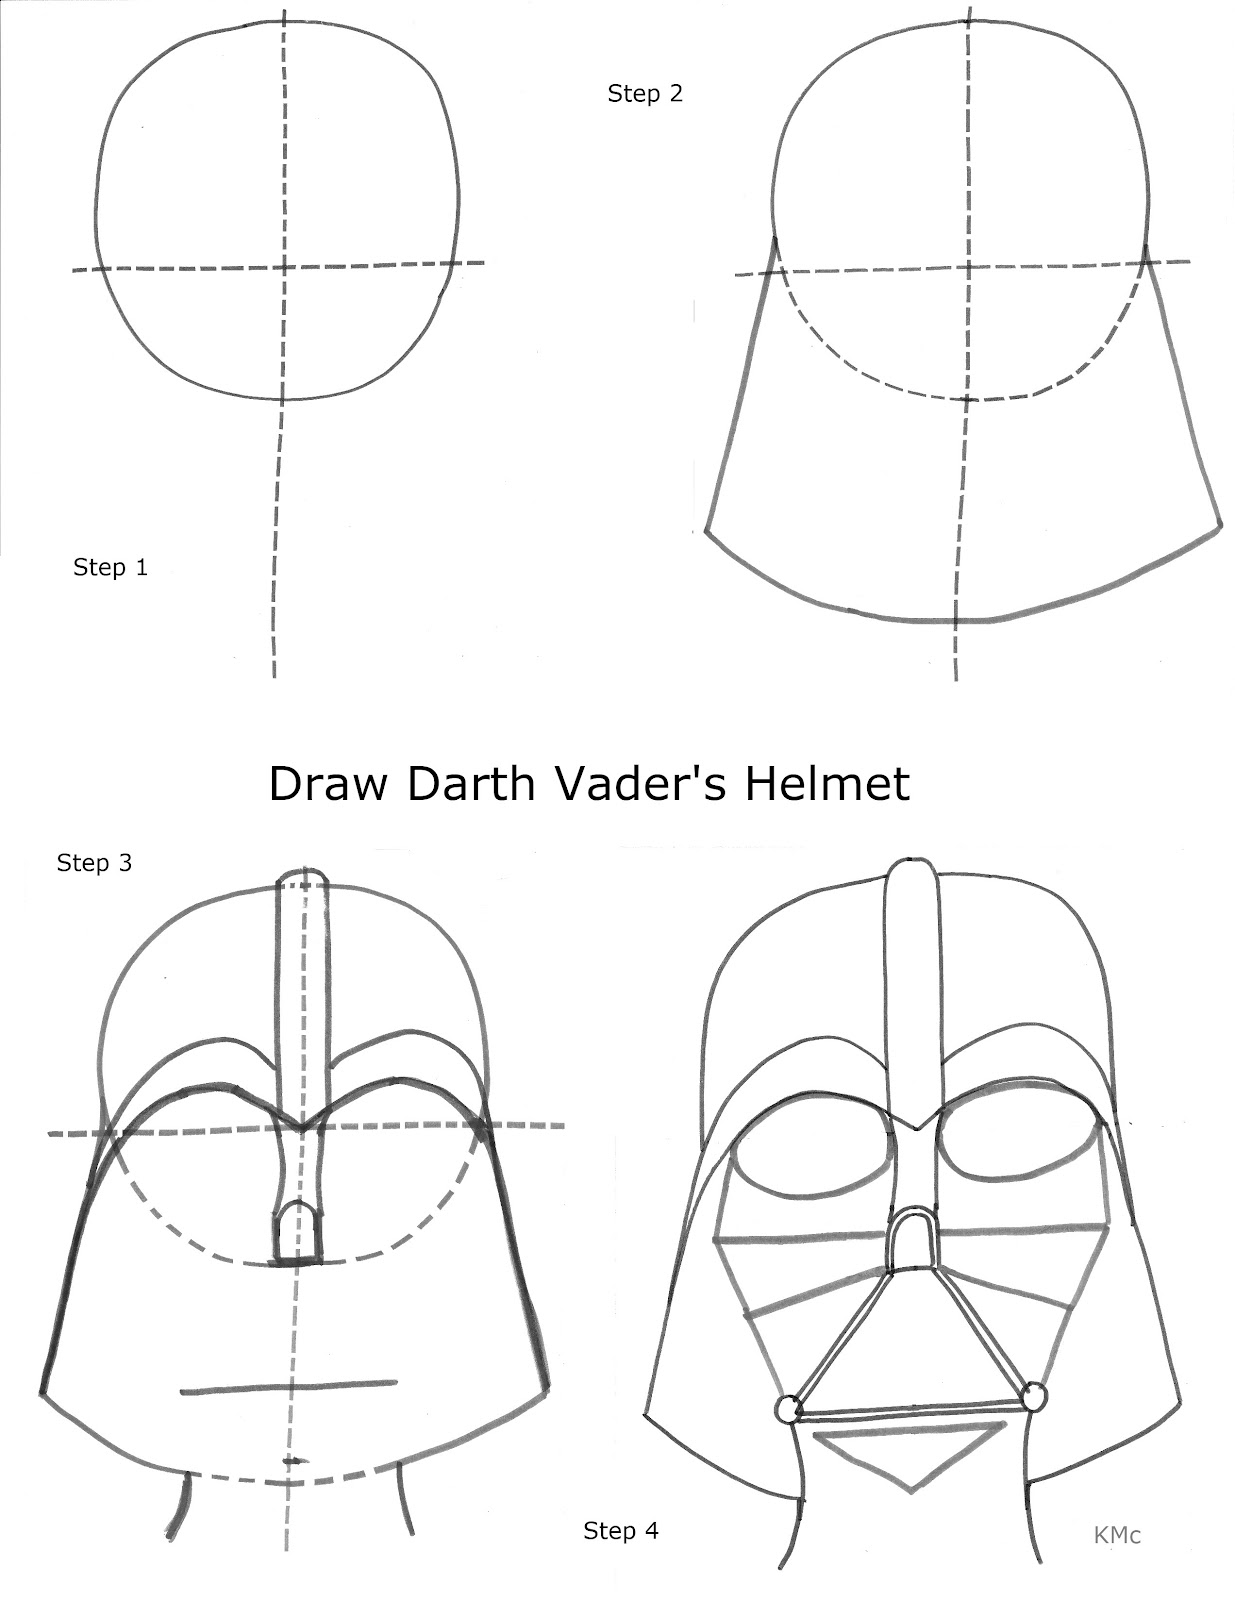 How To Draw with Kirk McConnell: How to Draw Darth Vader's Helmet